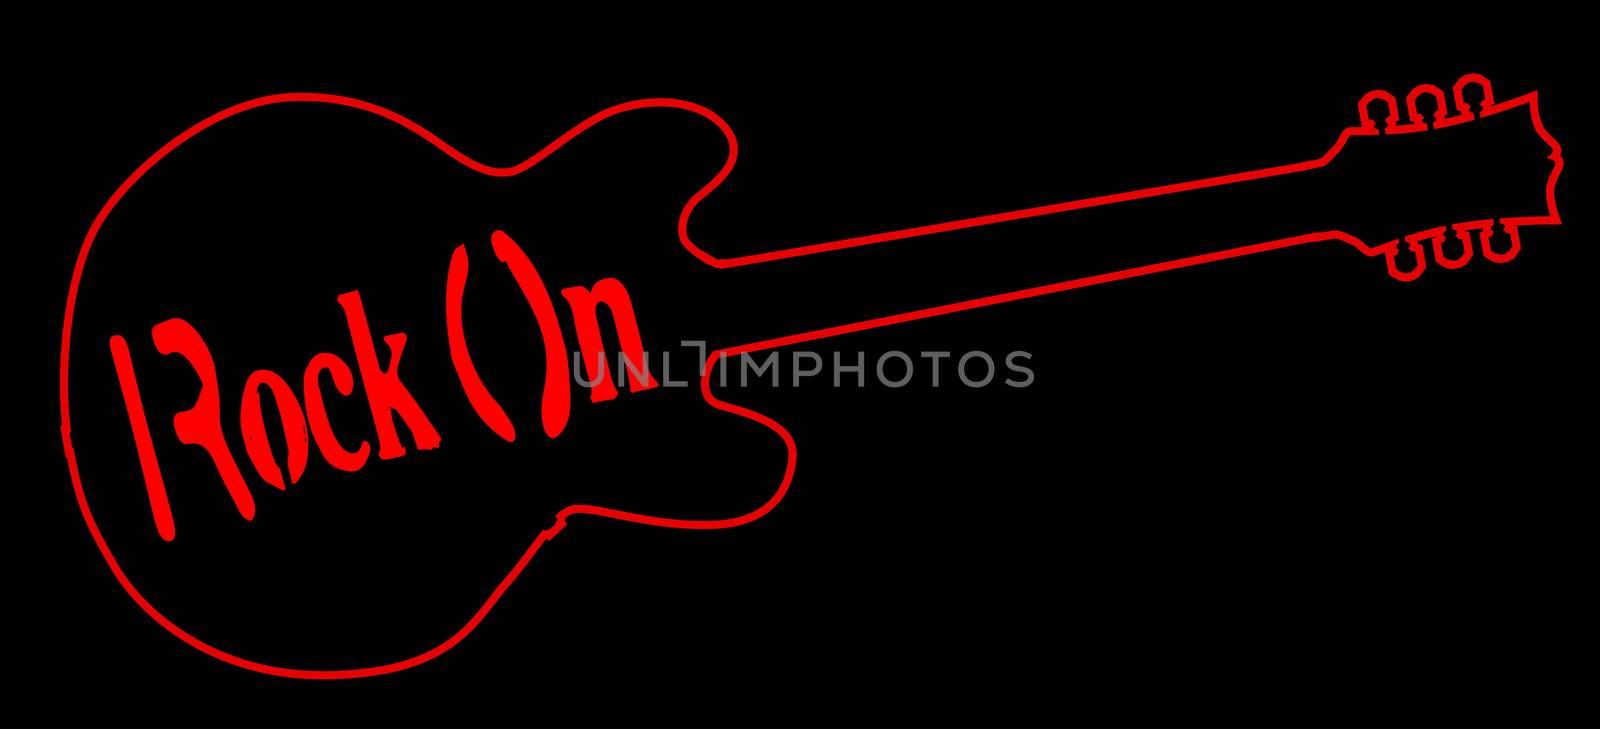 Red neon style guitar outline on black with Rock On red neon text